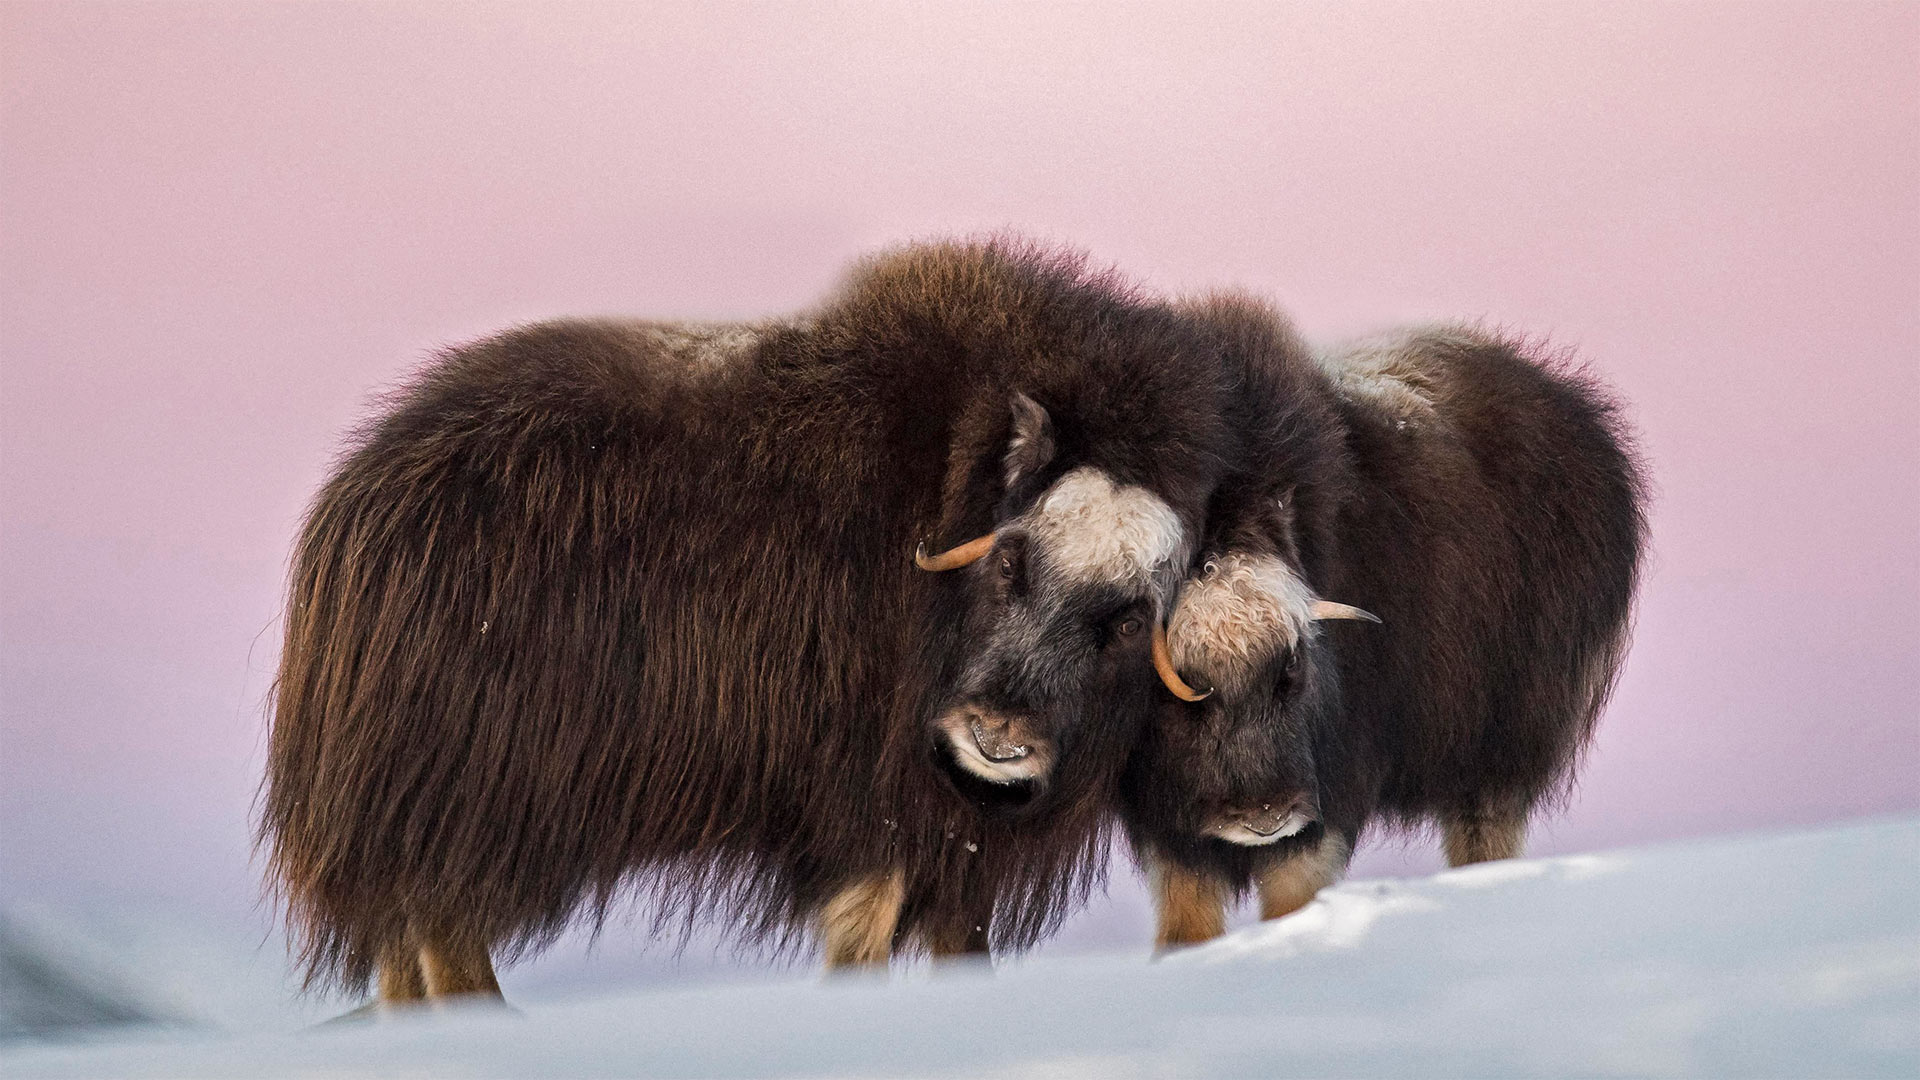 Muskox mother and calf in Dovre-Sunndalsfjella National Park